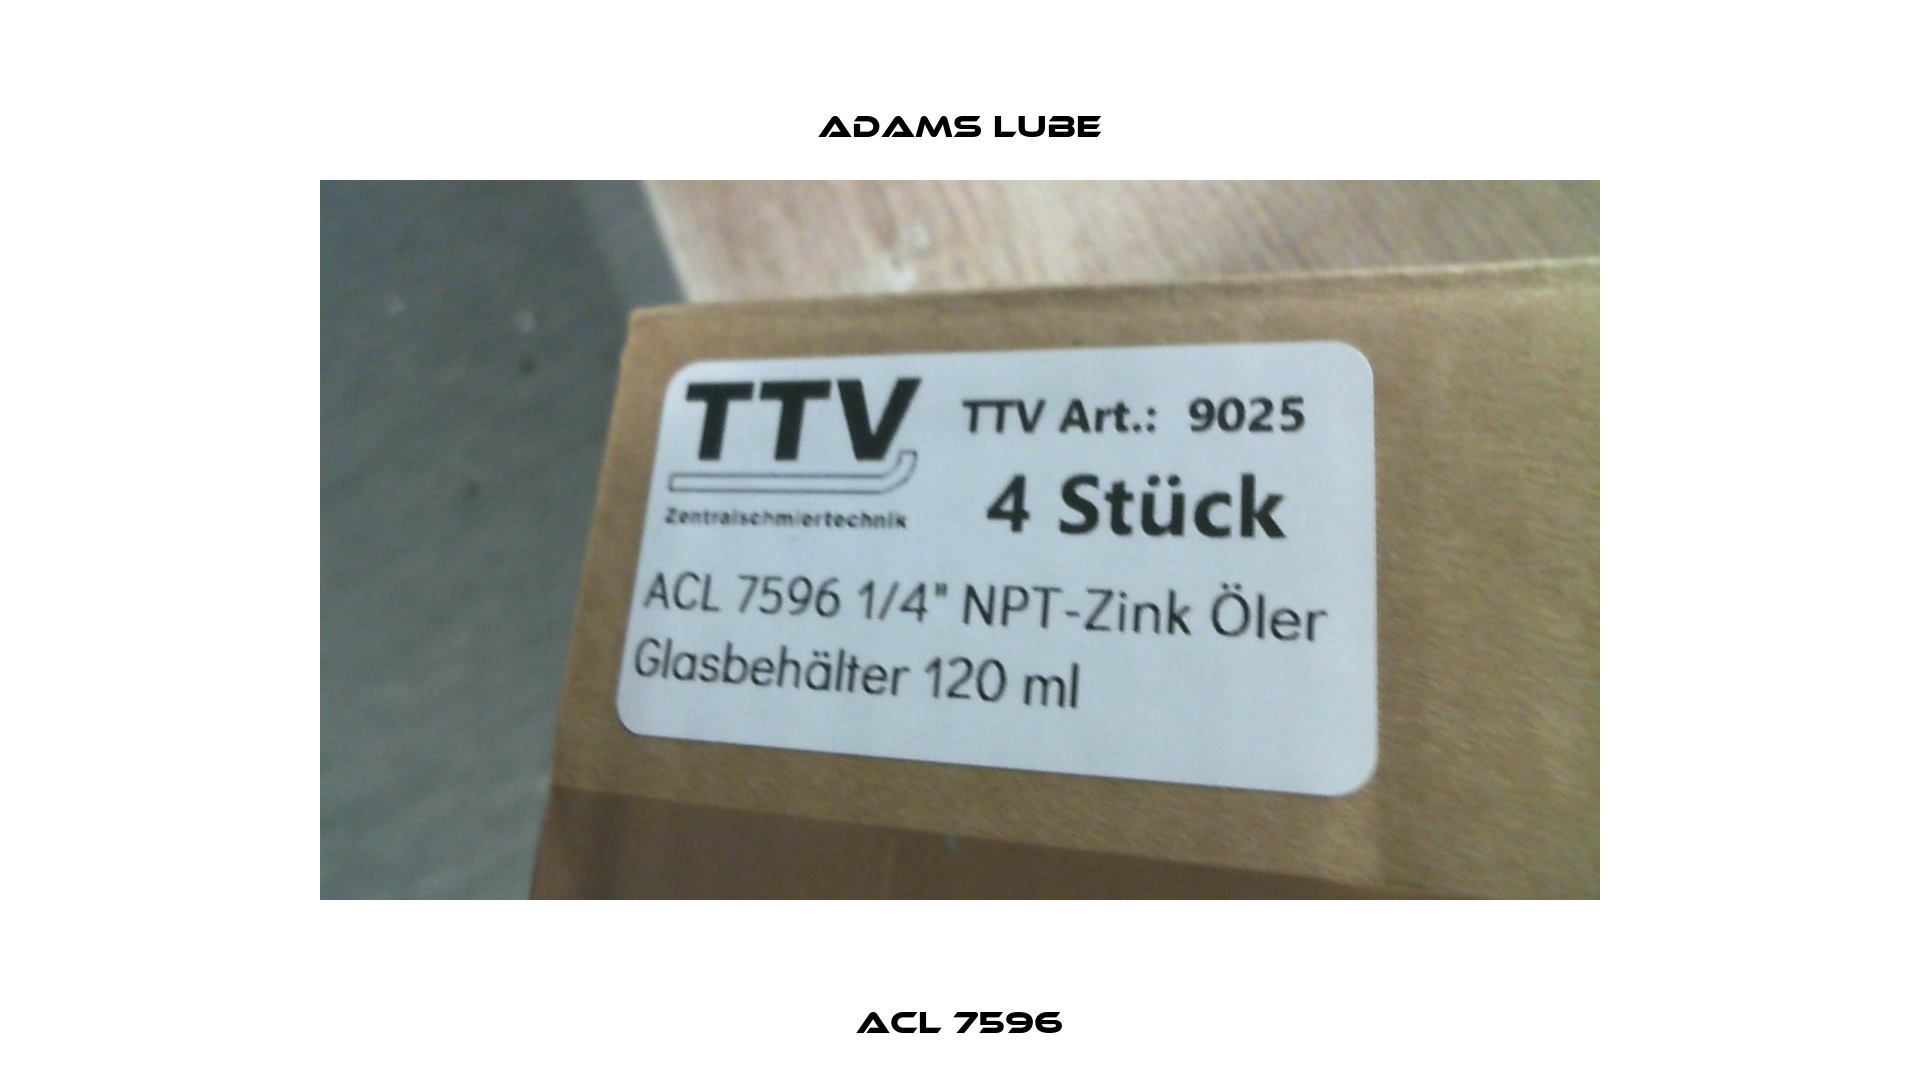 ACL 7596 Adams Lube